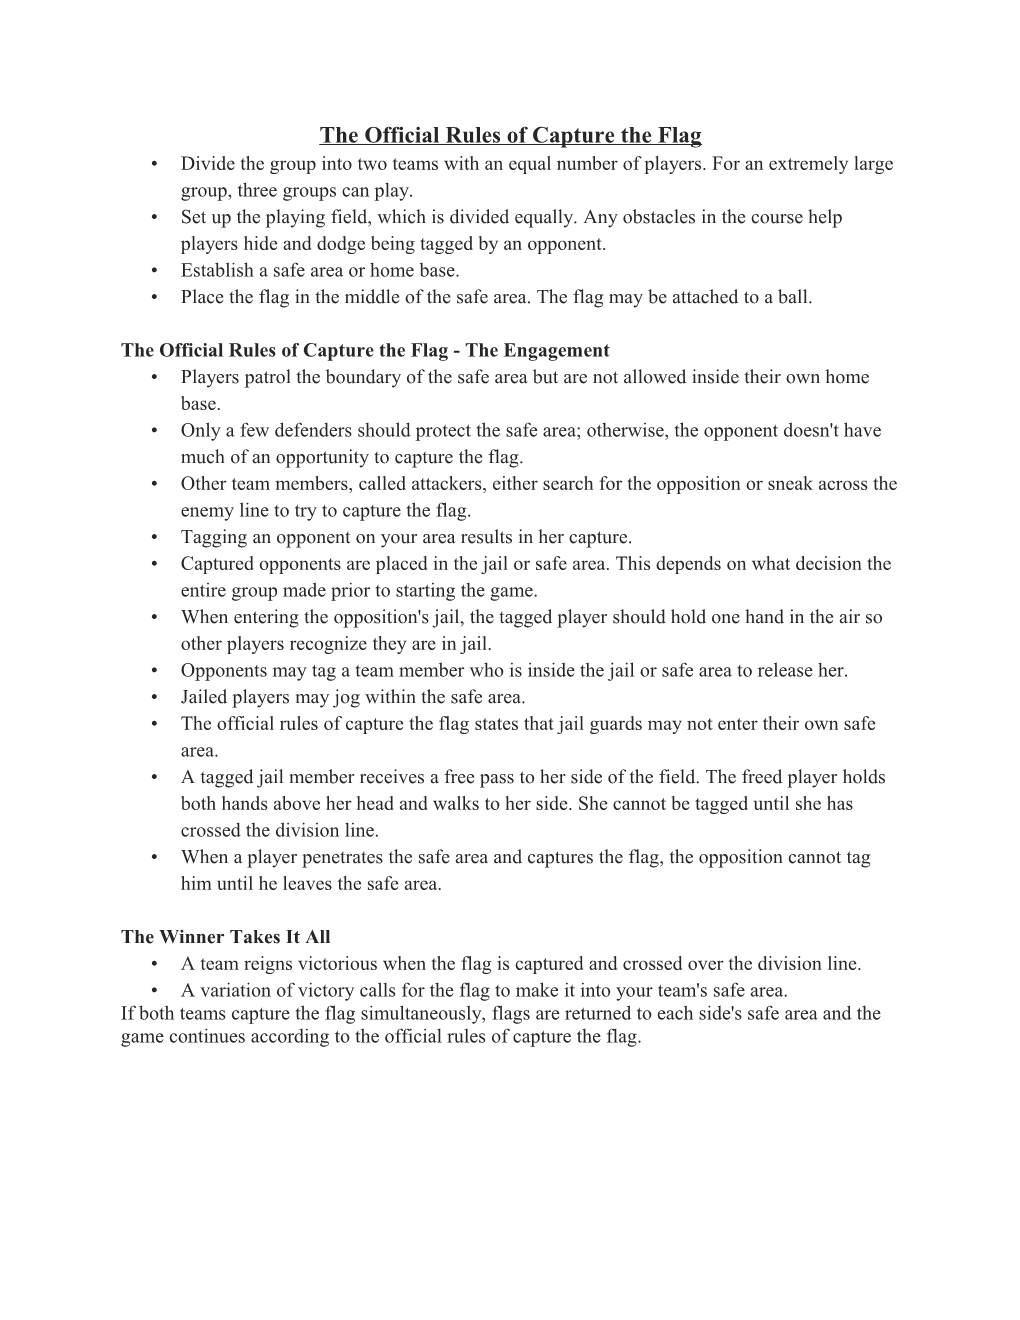 The Official Rules of Capture the Flag